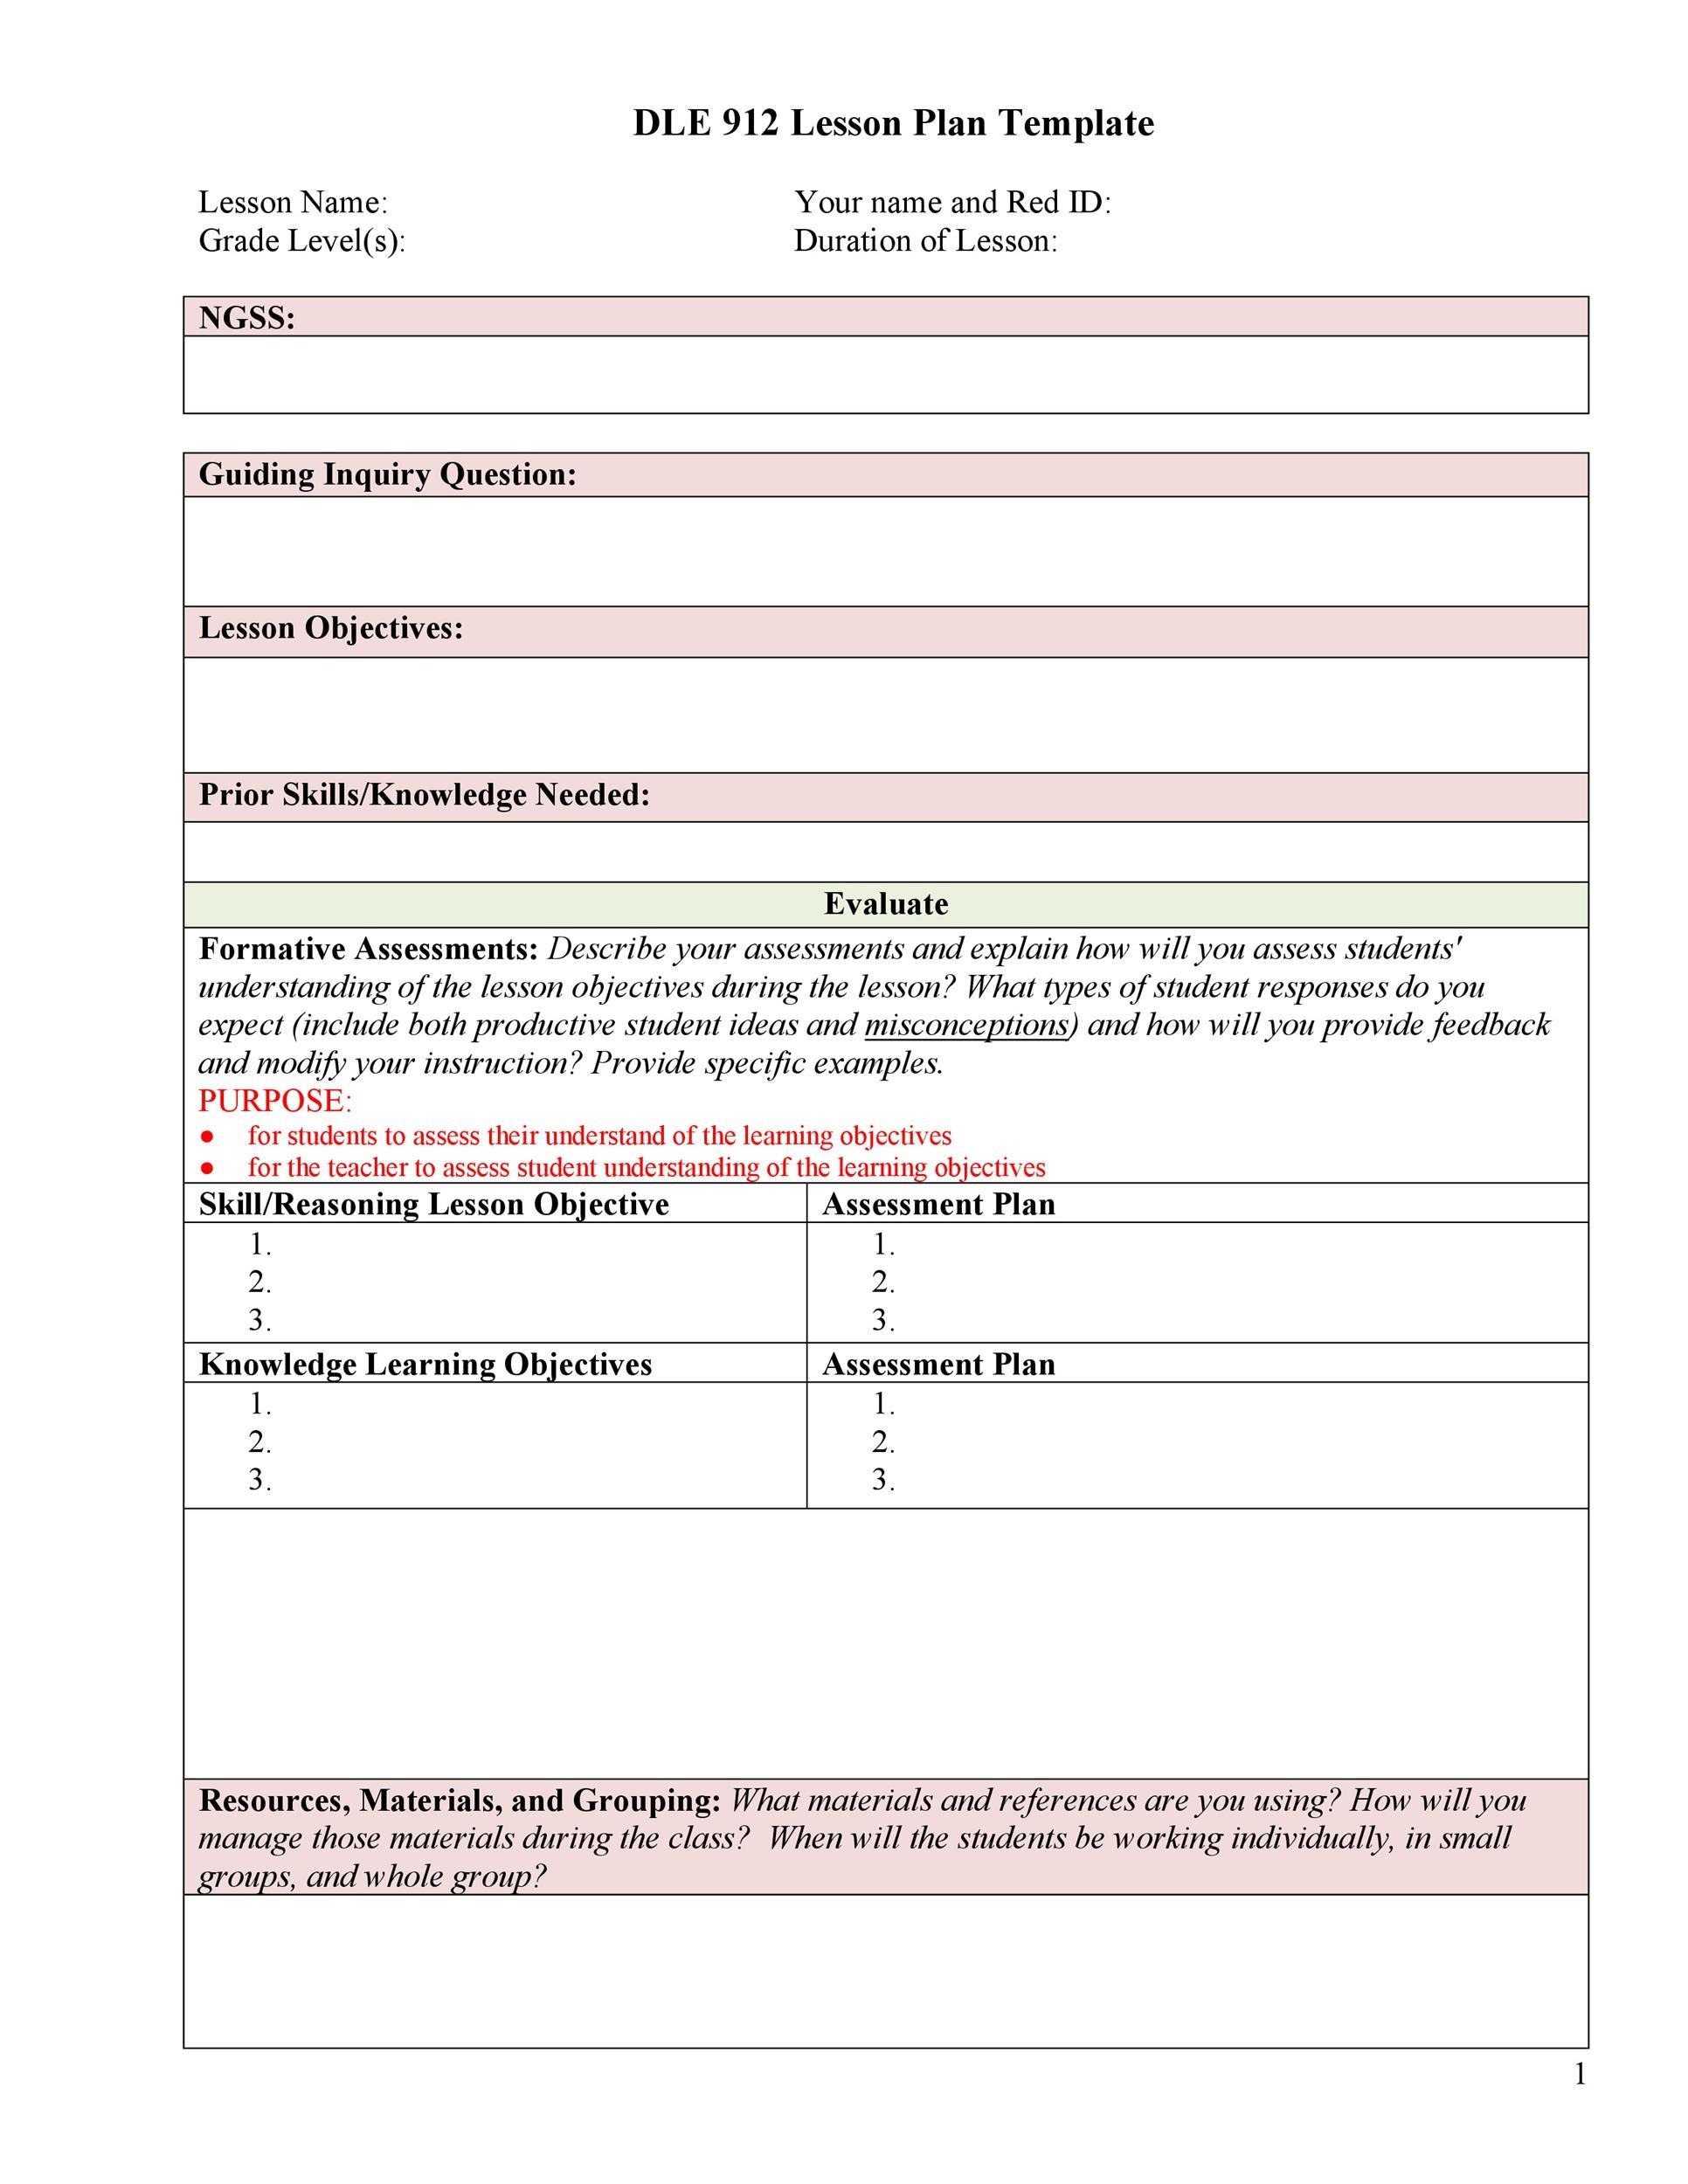 Free lesson plan template 26